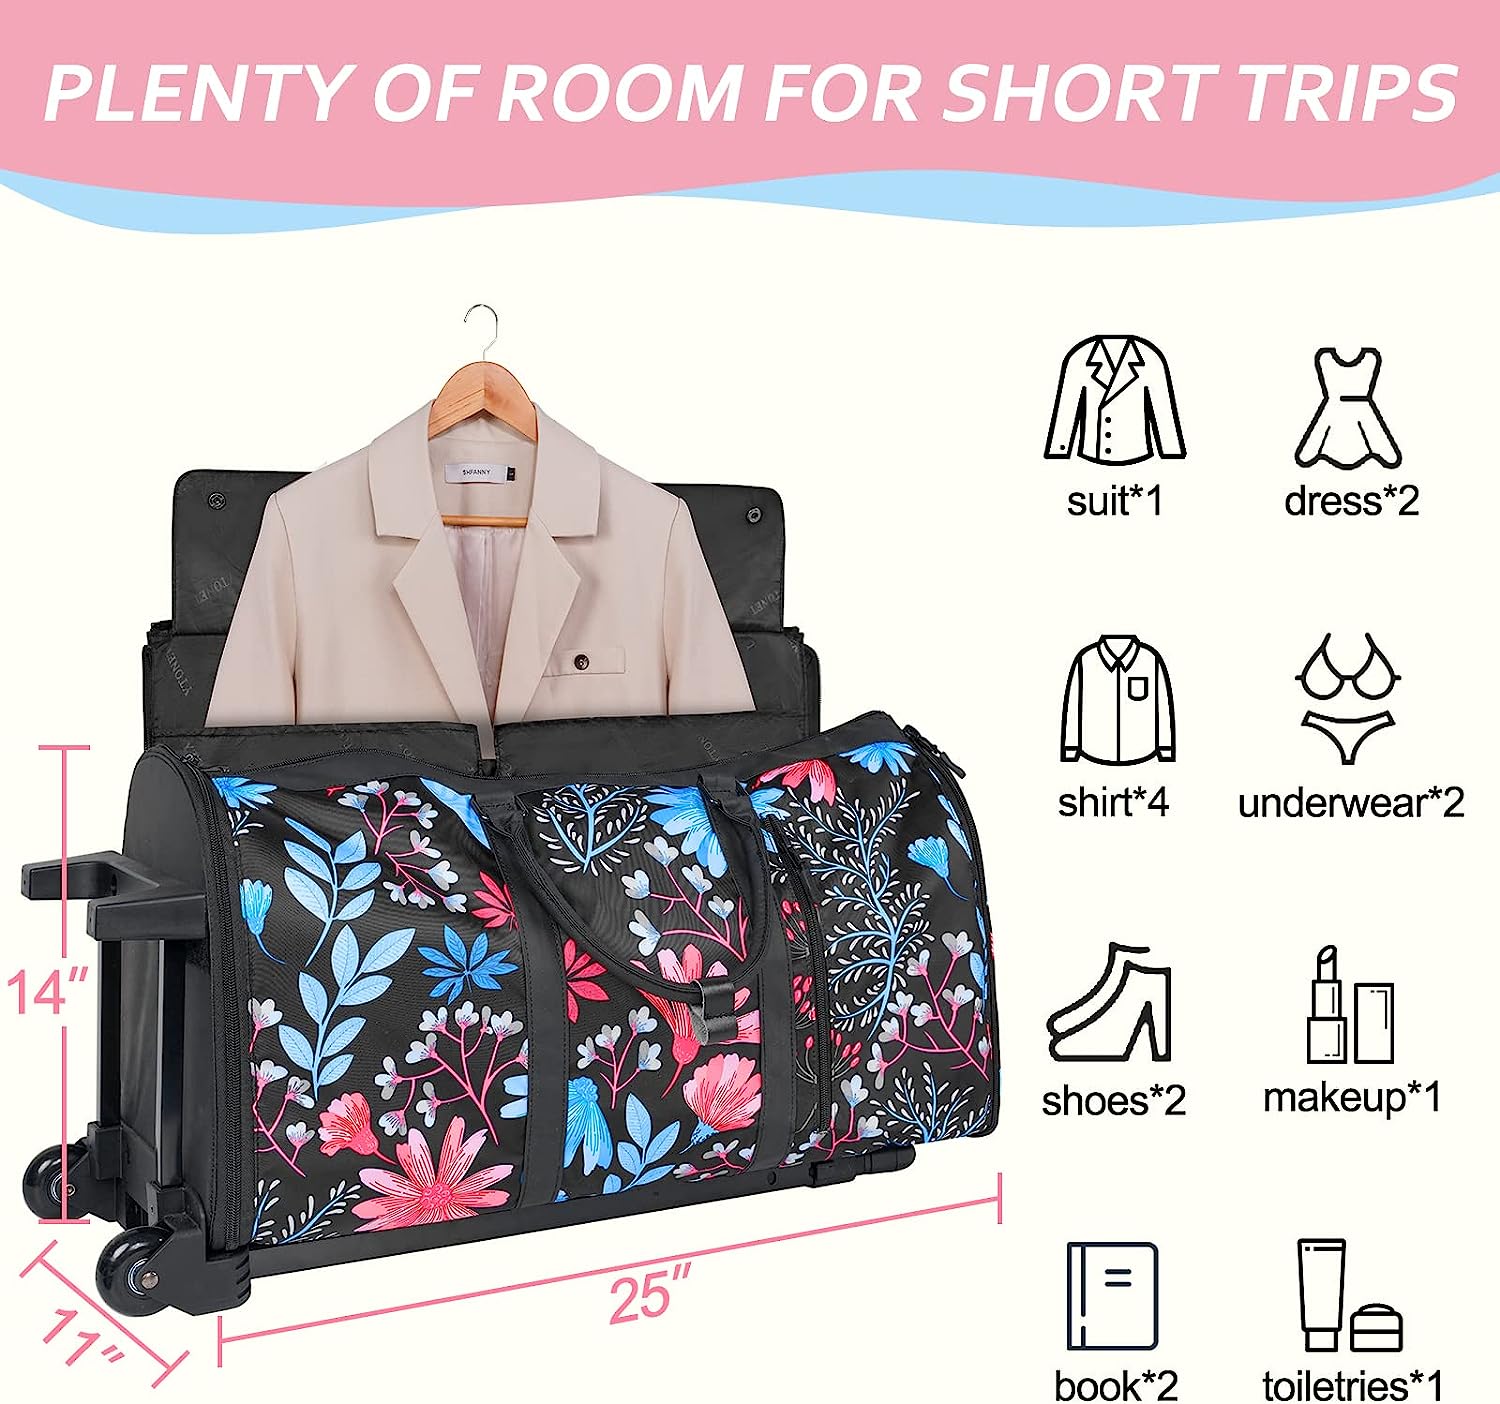 Rolling Garment Bag for Women, Durable Rolling Duffle Bag with Shoe Compartment for Daughter, Garment Bags for Travel with Wheels, Travel Overnight Weekender Bags Trolley Luggage Suitcase, Floral